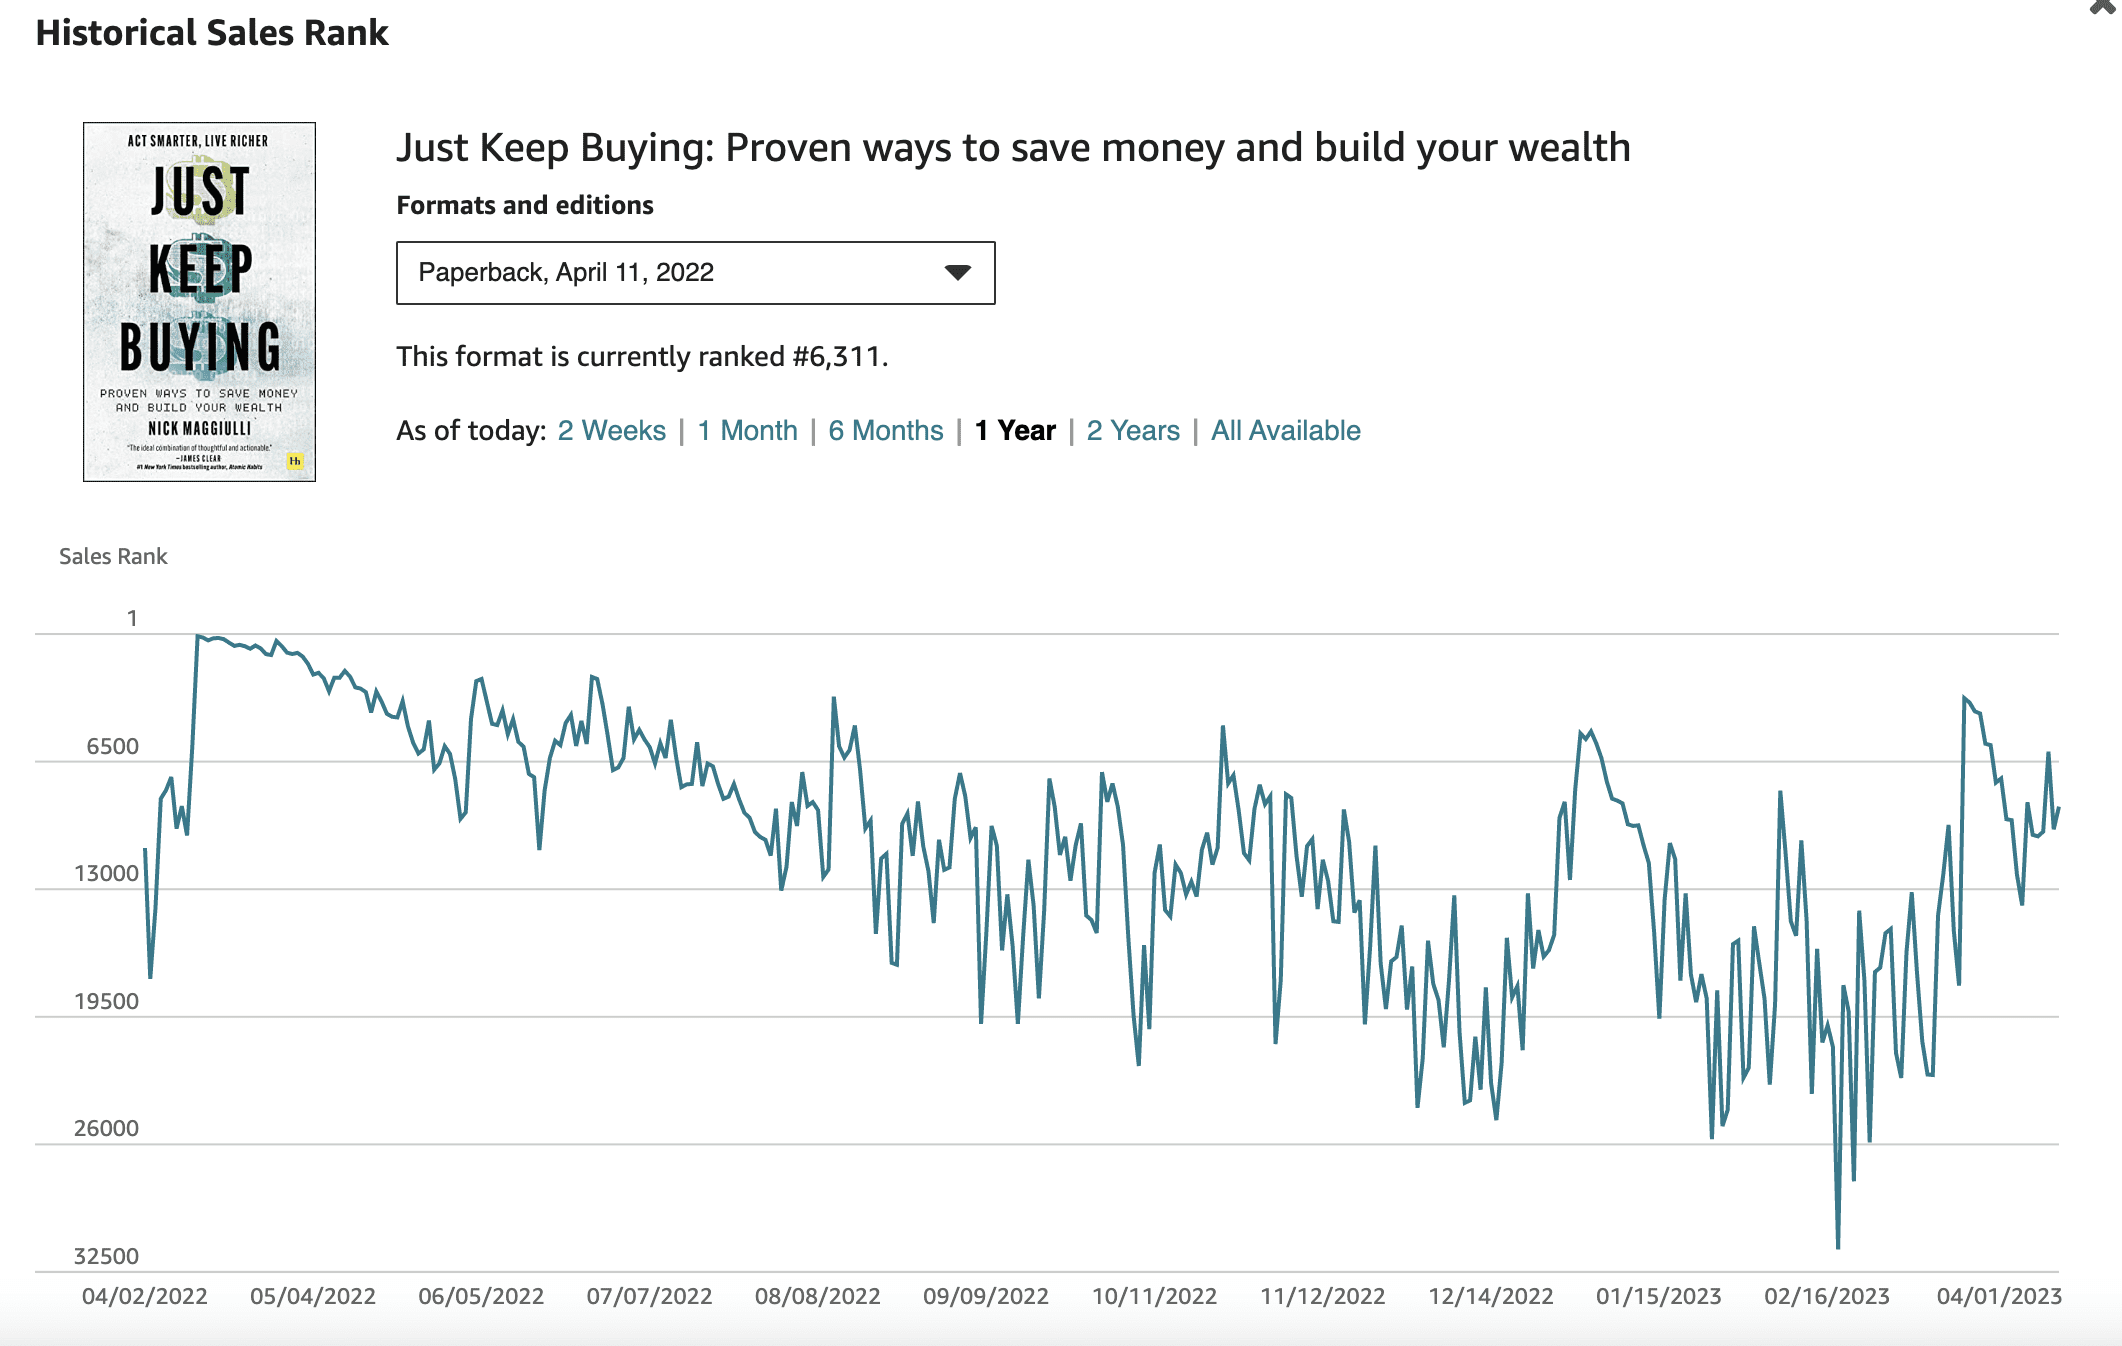 Chart showing the Amazon rank data of Just Keep Buying from early April 2022 to early April 2023.